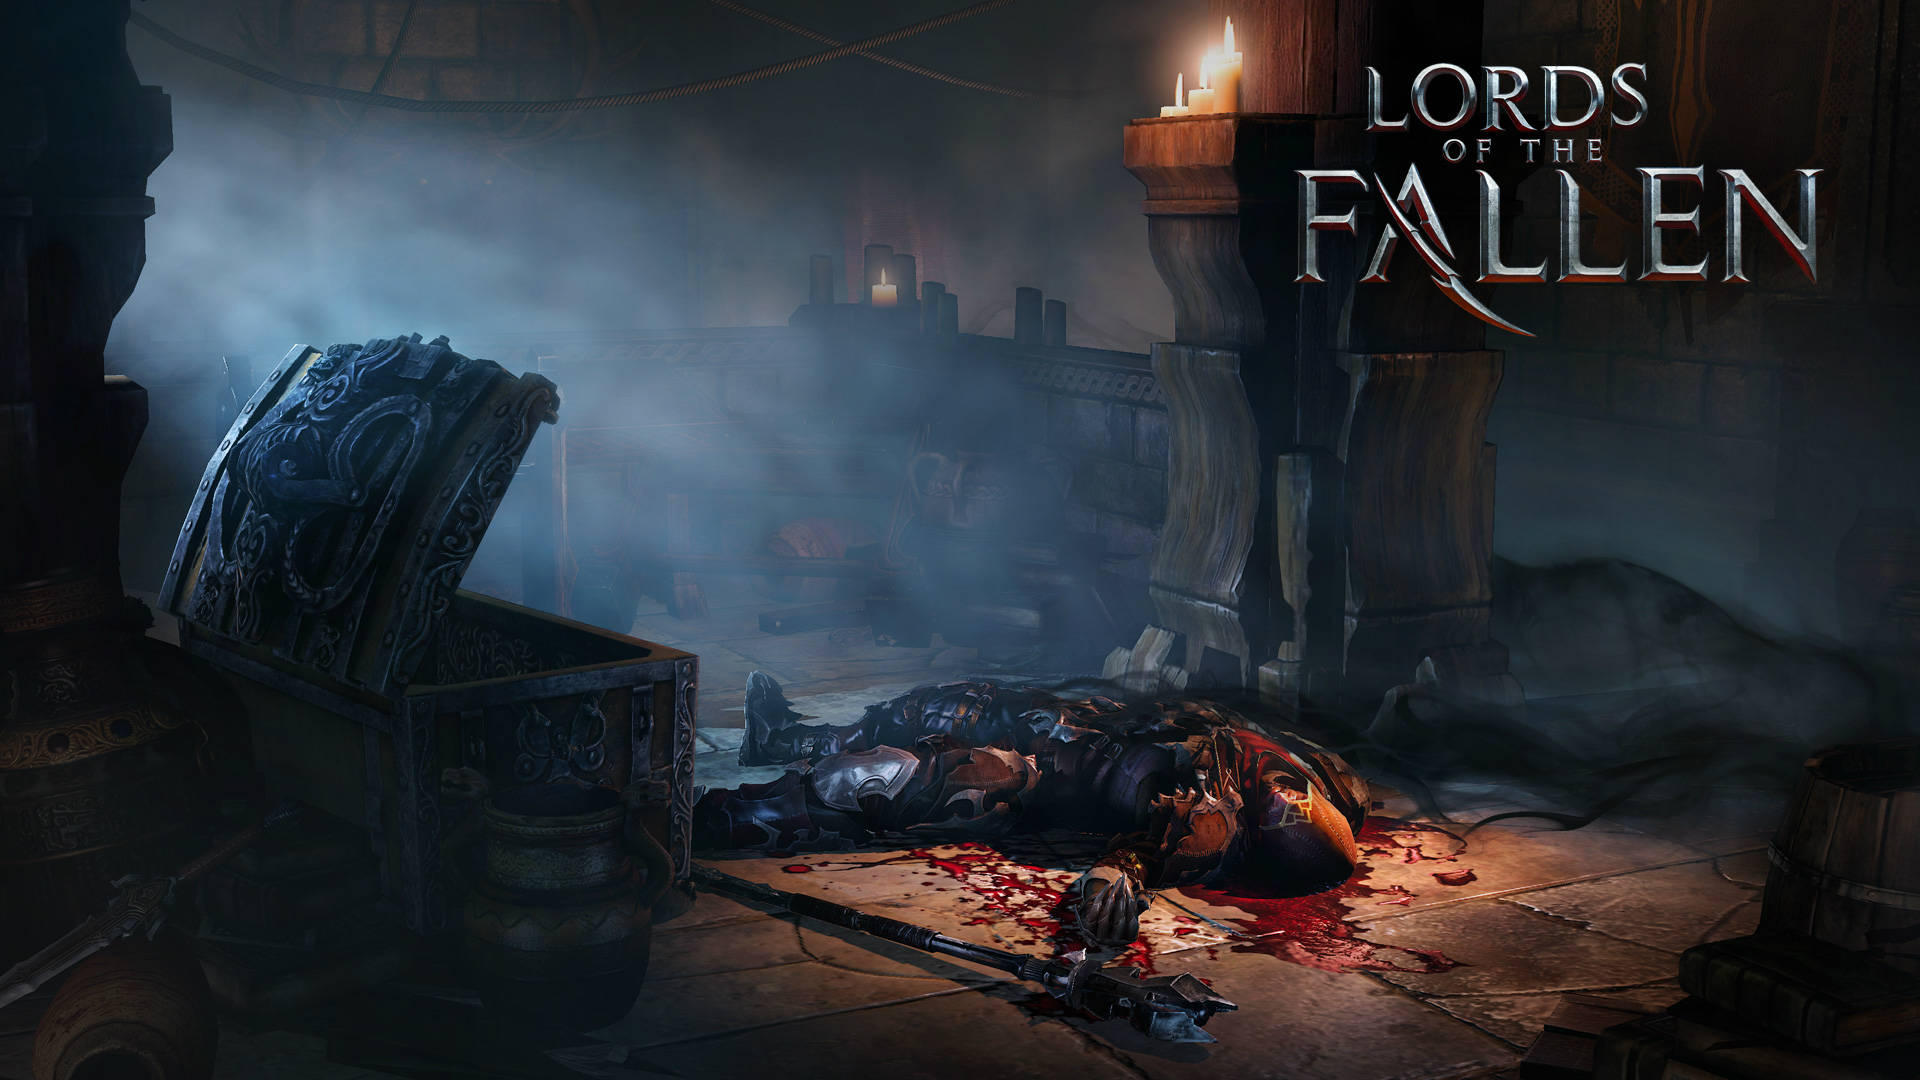 Download - Lord Of The Fallen , HD Wallpaper & Backgrounds